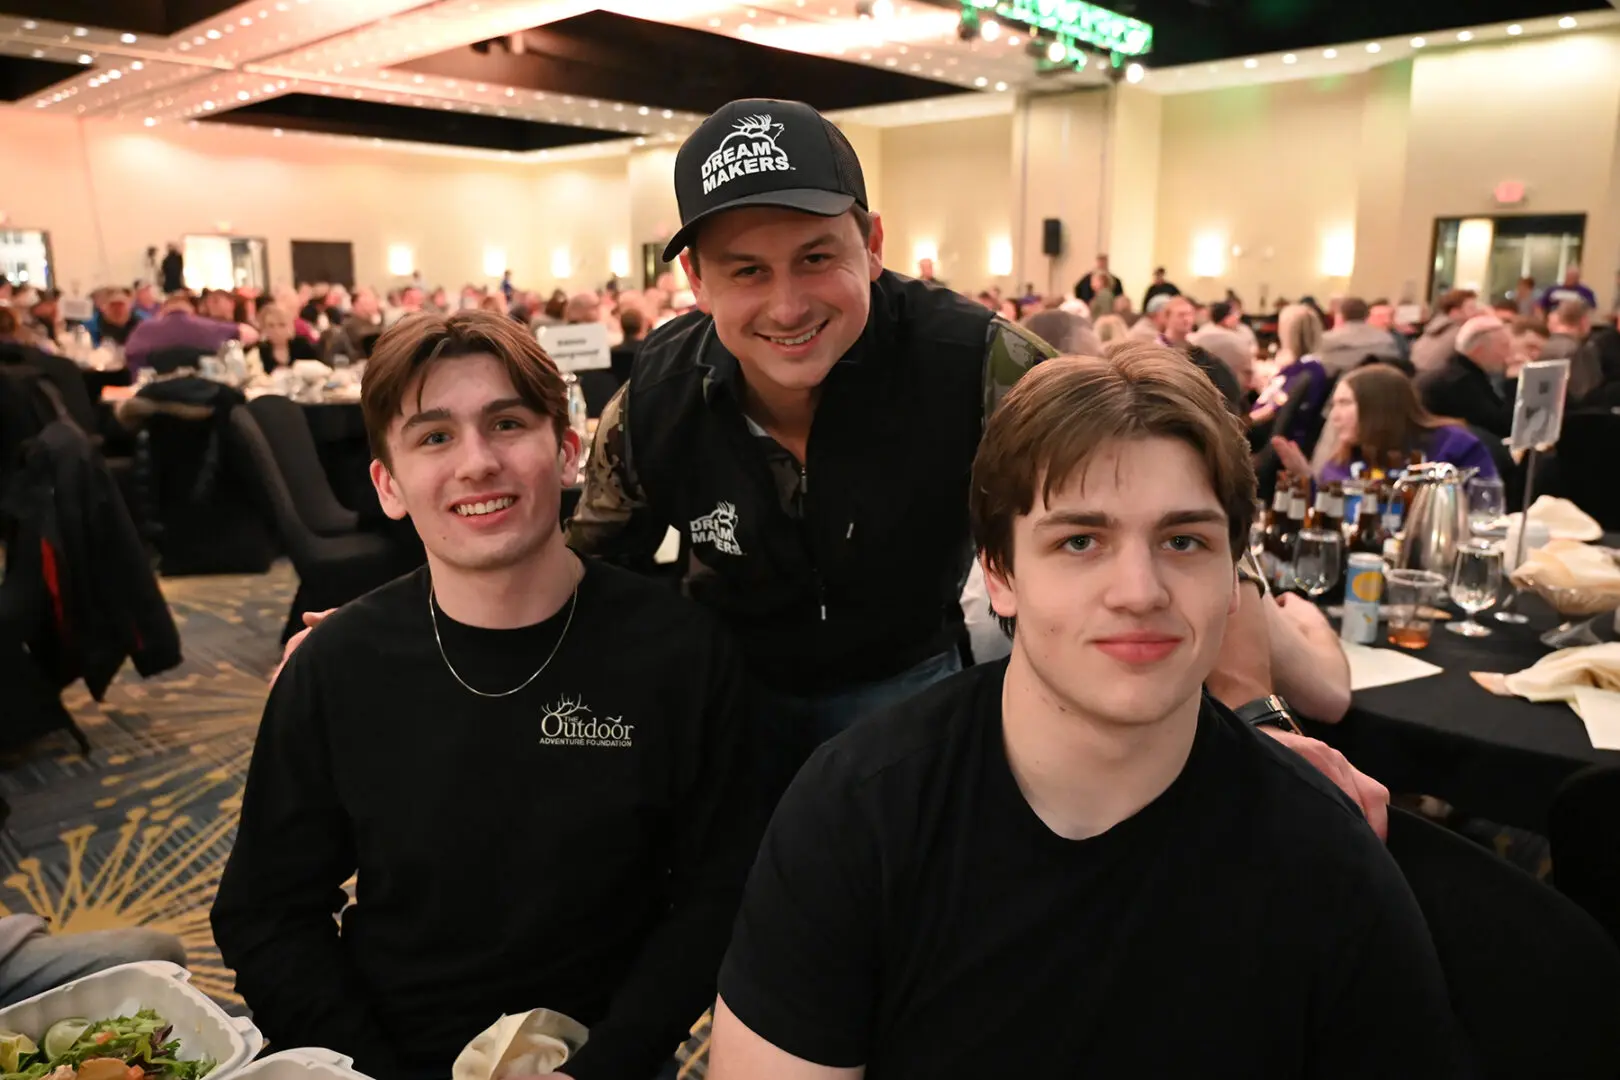 Three men posing for a picture at an event.